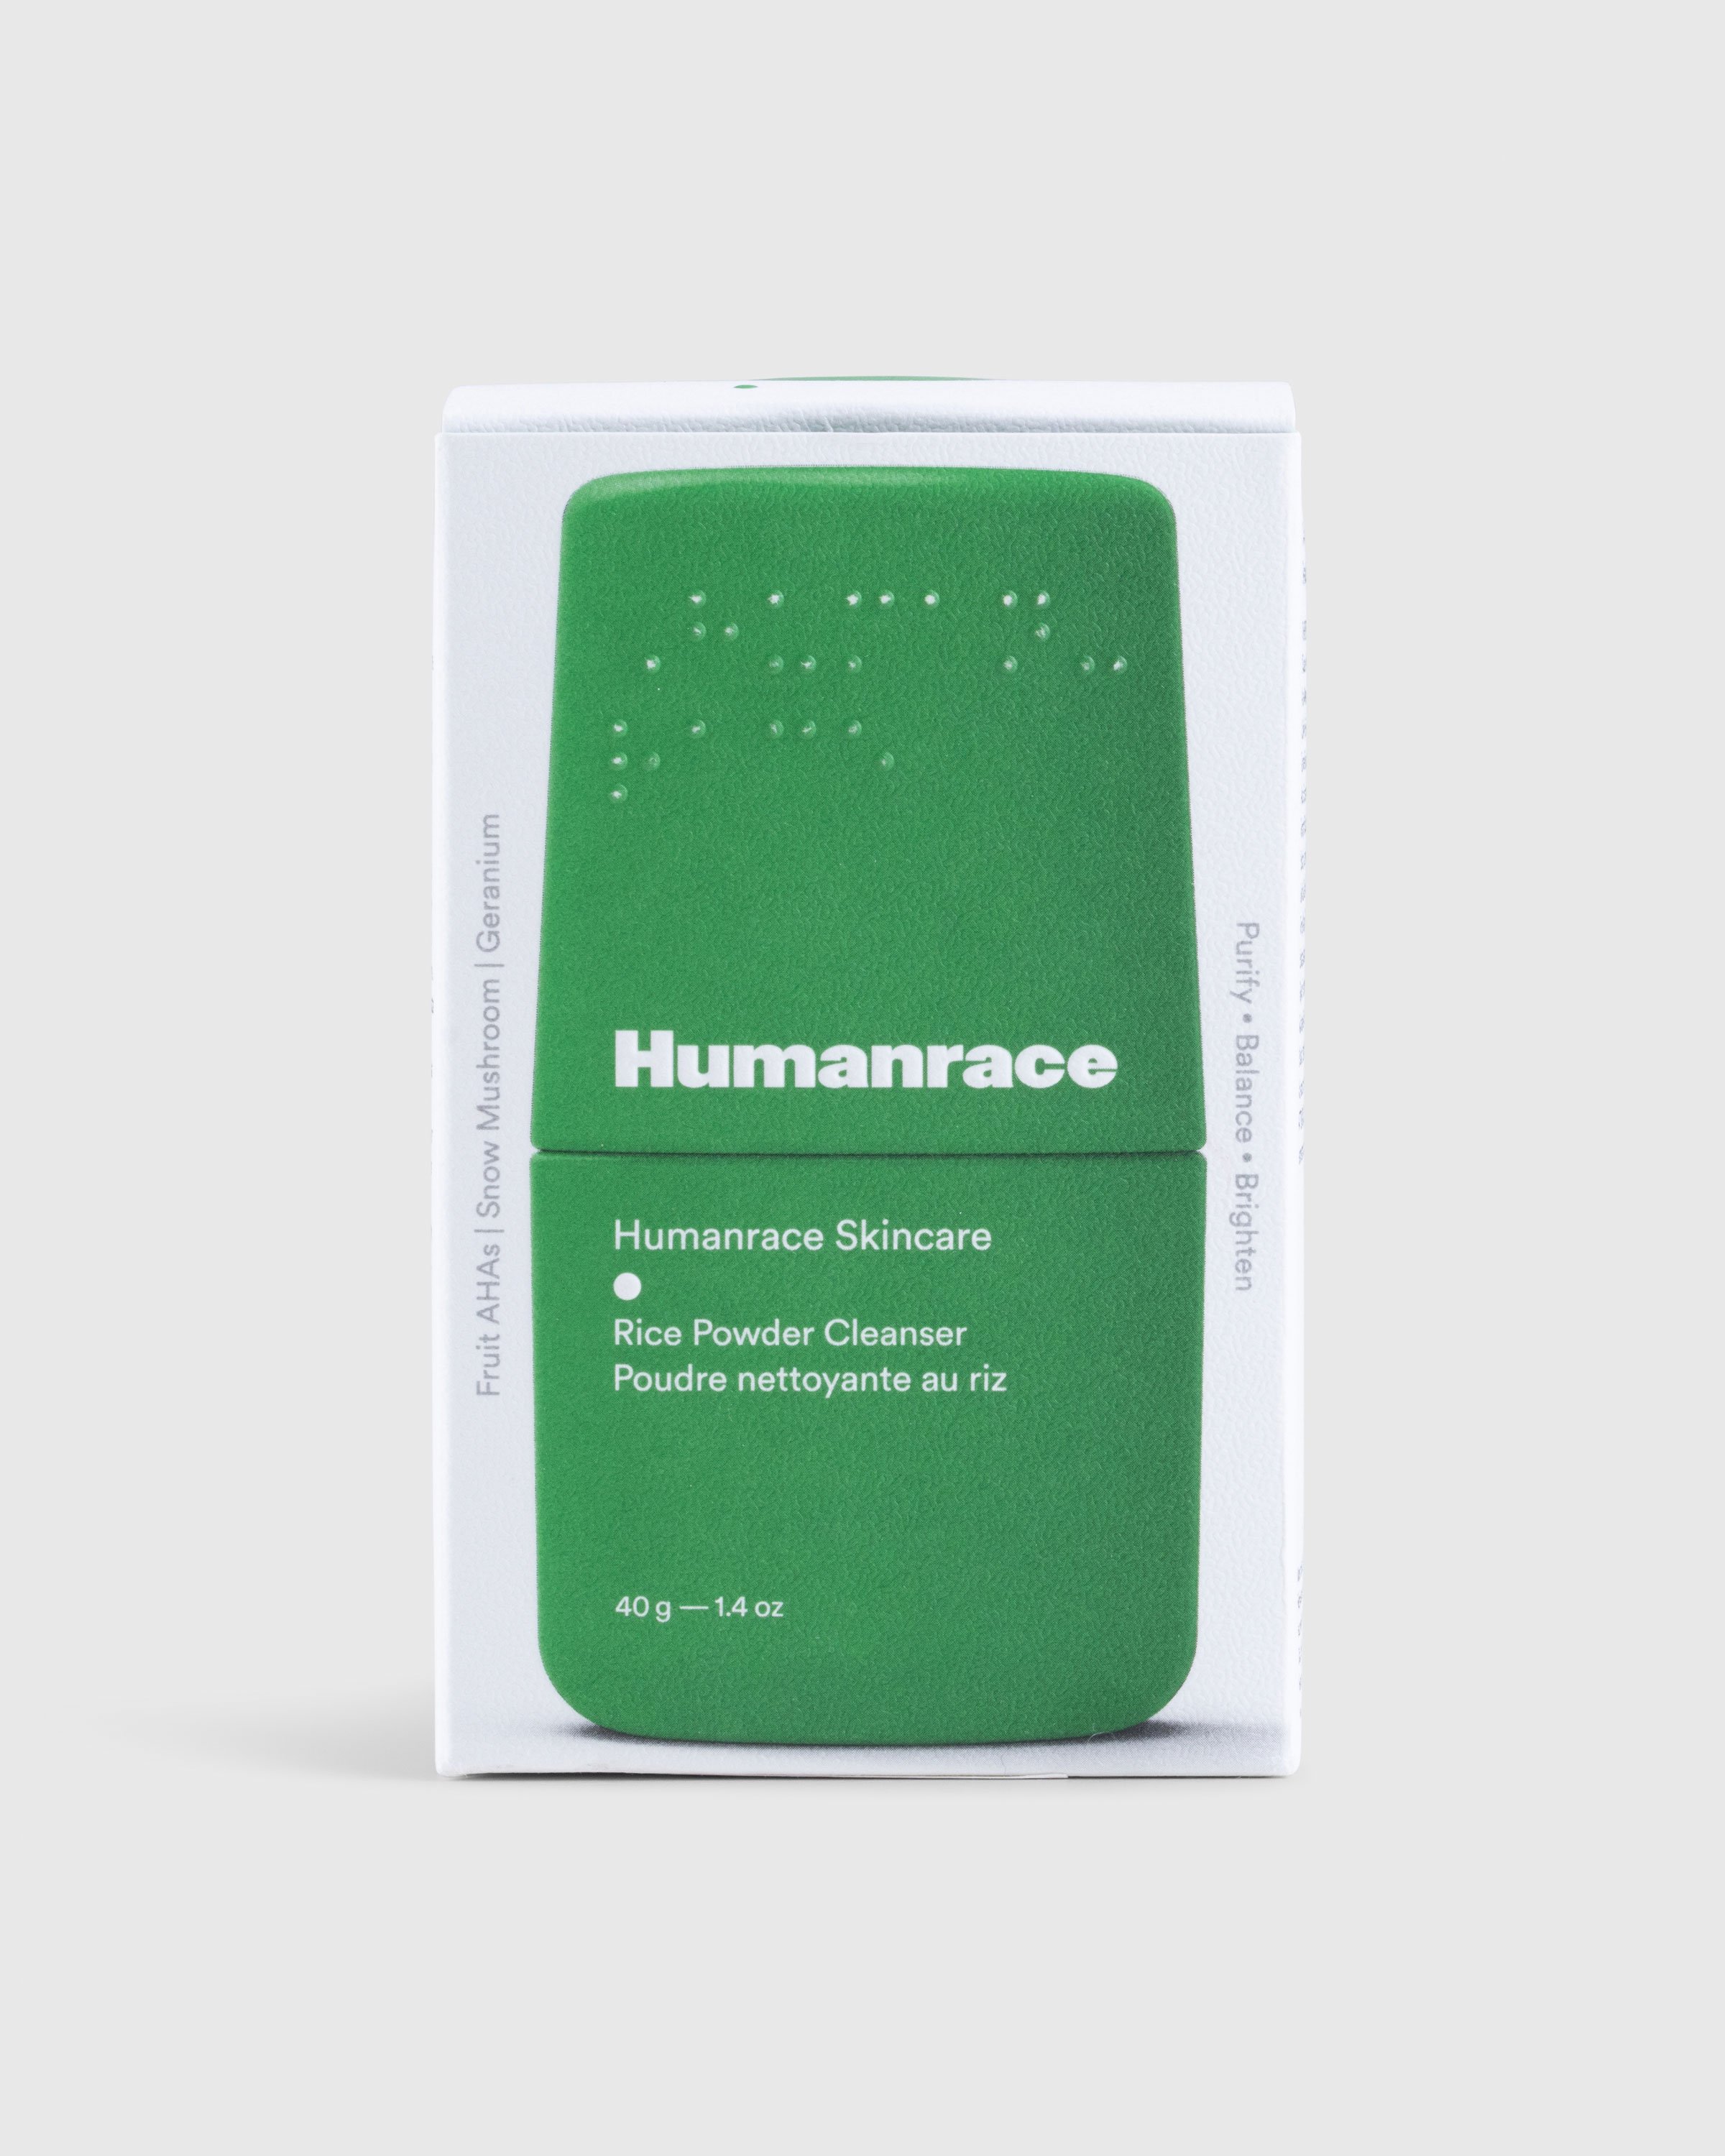 Humanrace - Rice Powder Cleanser - Lifestyle - Green - Image 2